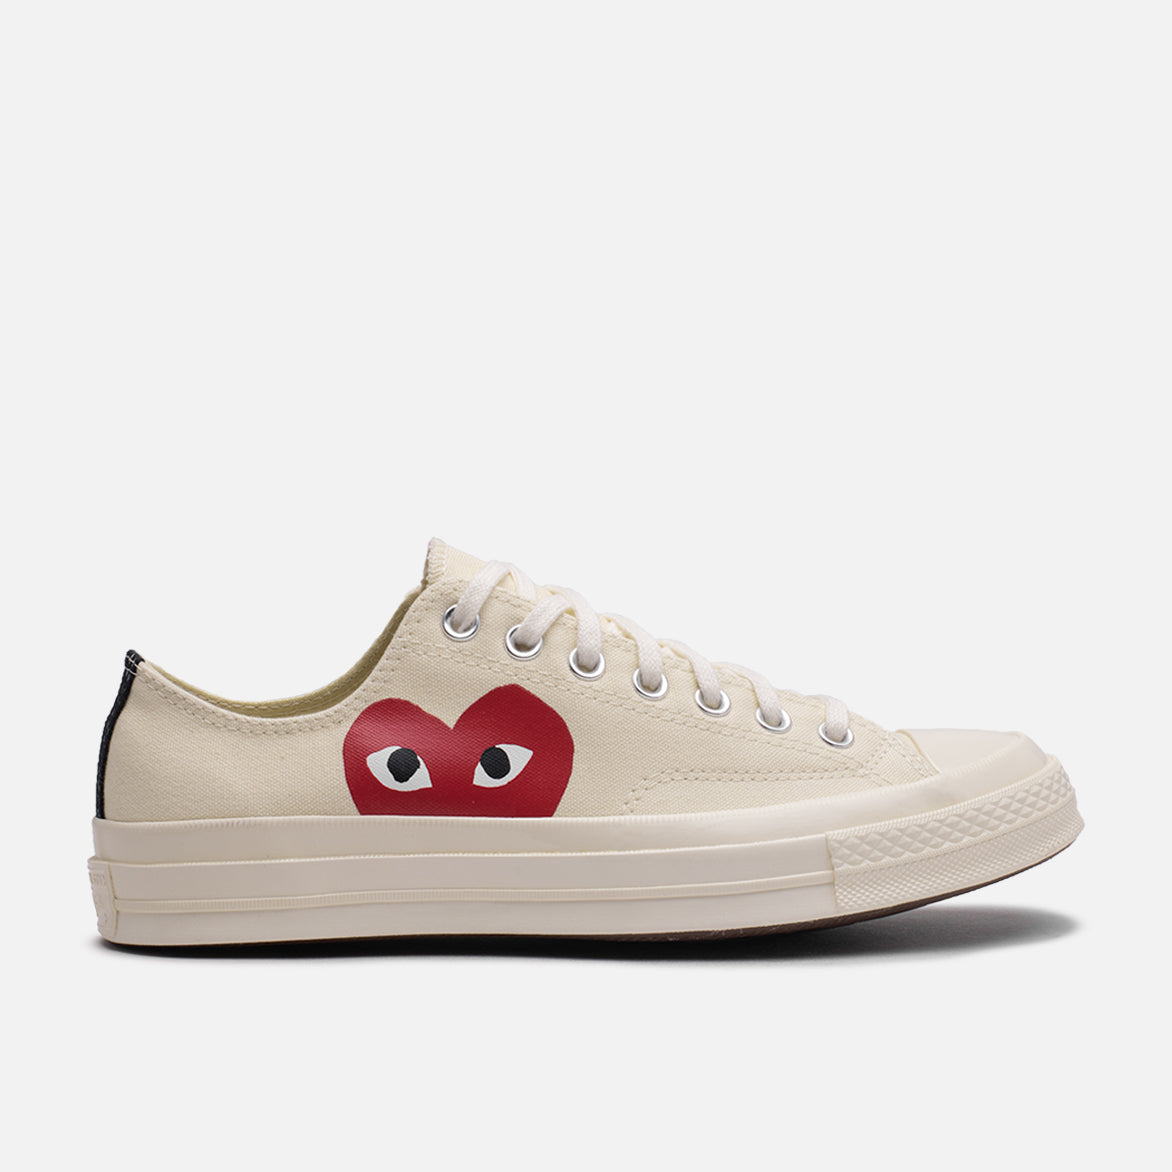 CDG PLAY X CONVERSE CHUCK TAYLOR ALL '70 OX - WHITE | lapstoneandhammer.com